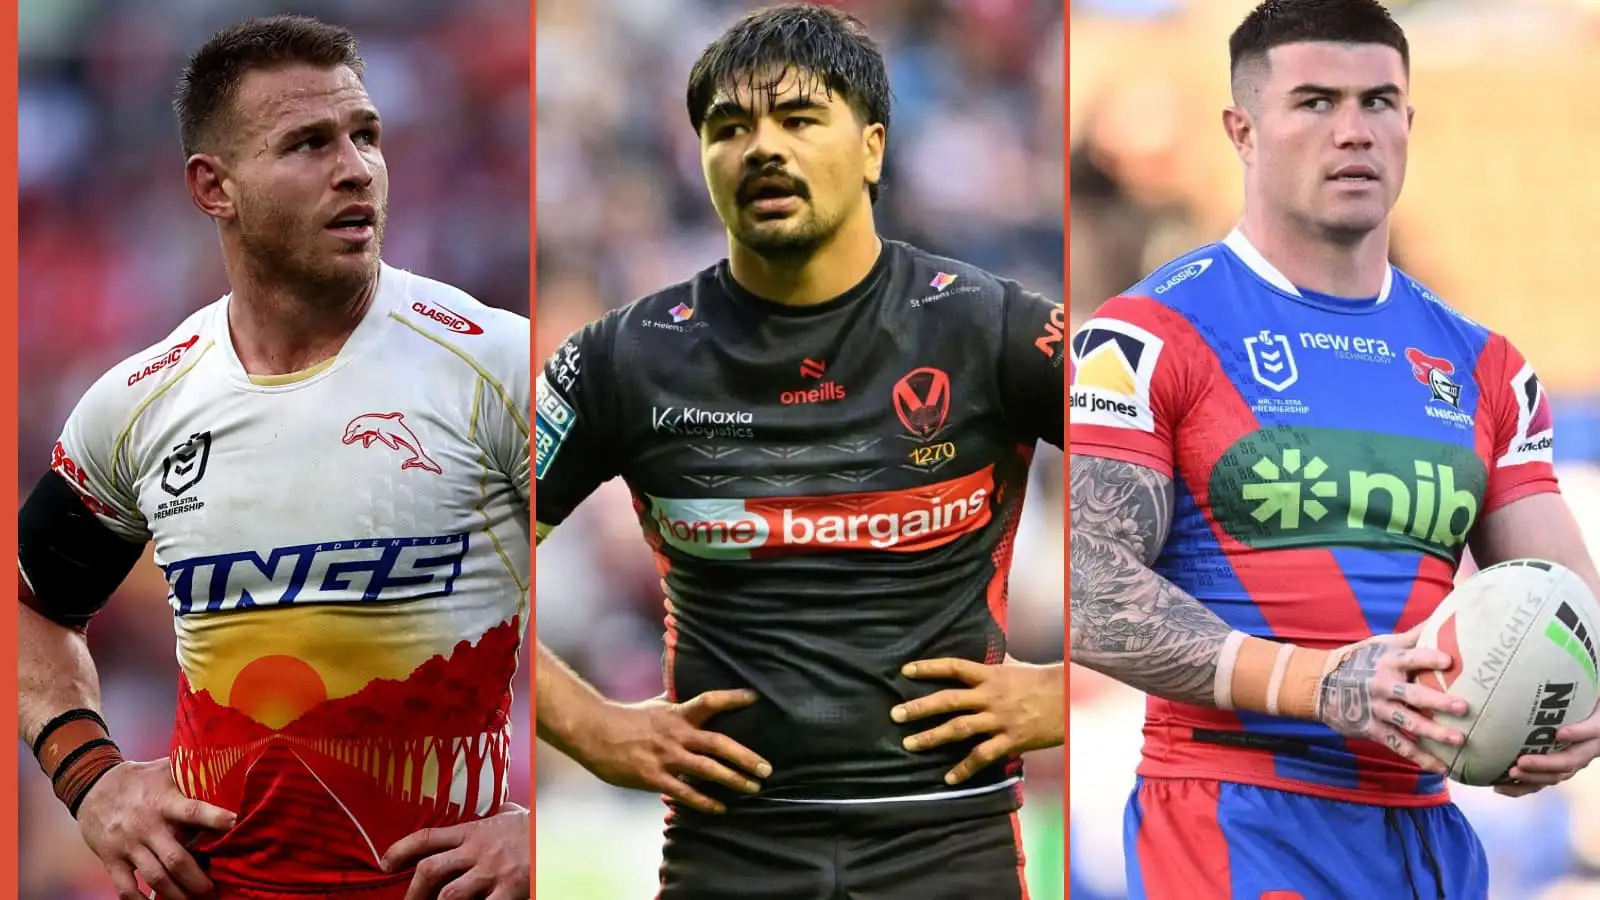 State of Origin and NRL stars among outstanding non-English picks who could represent Great Britain